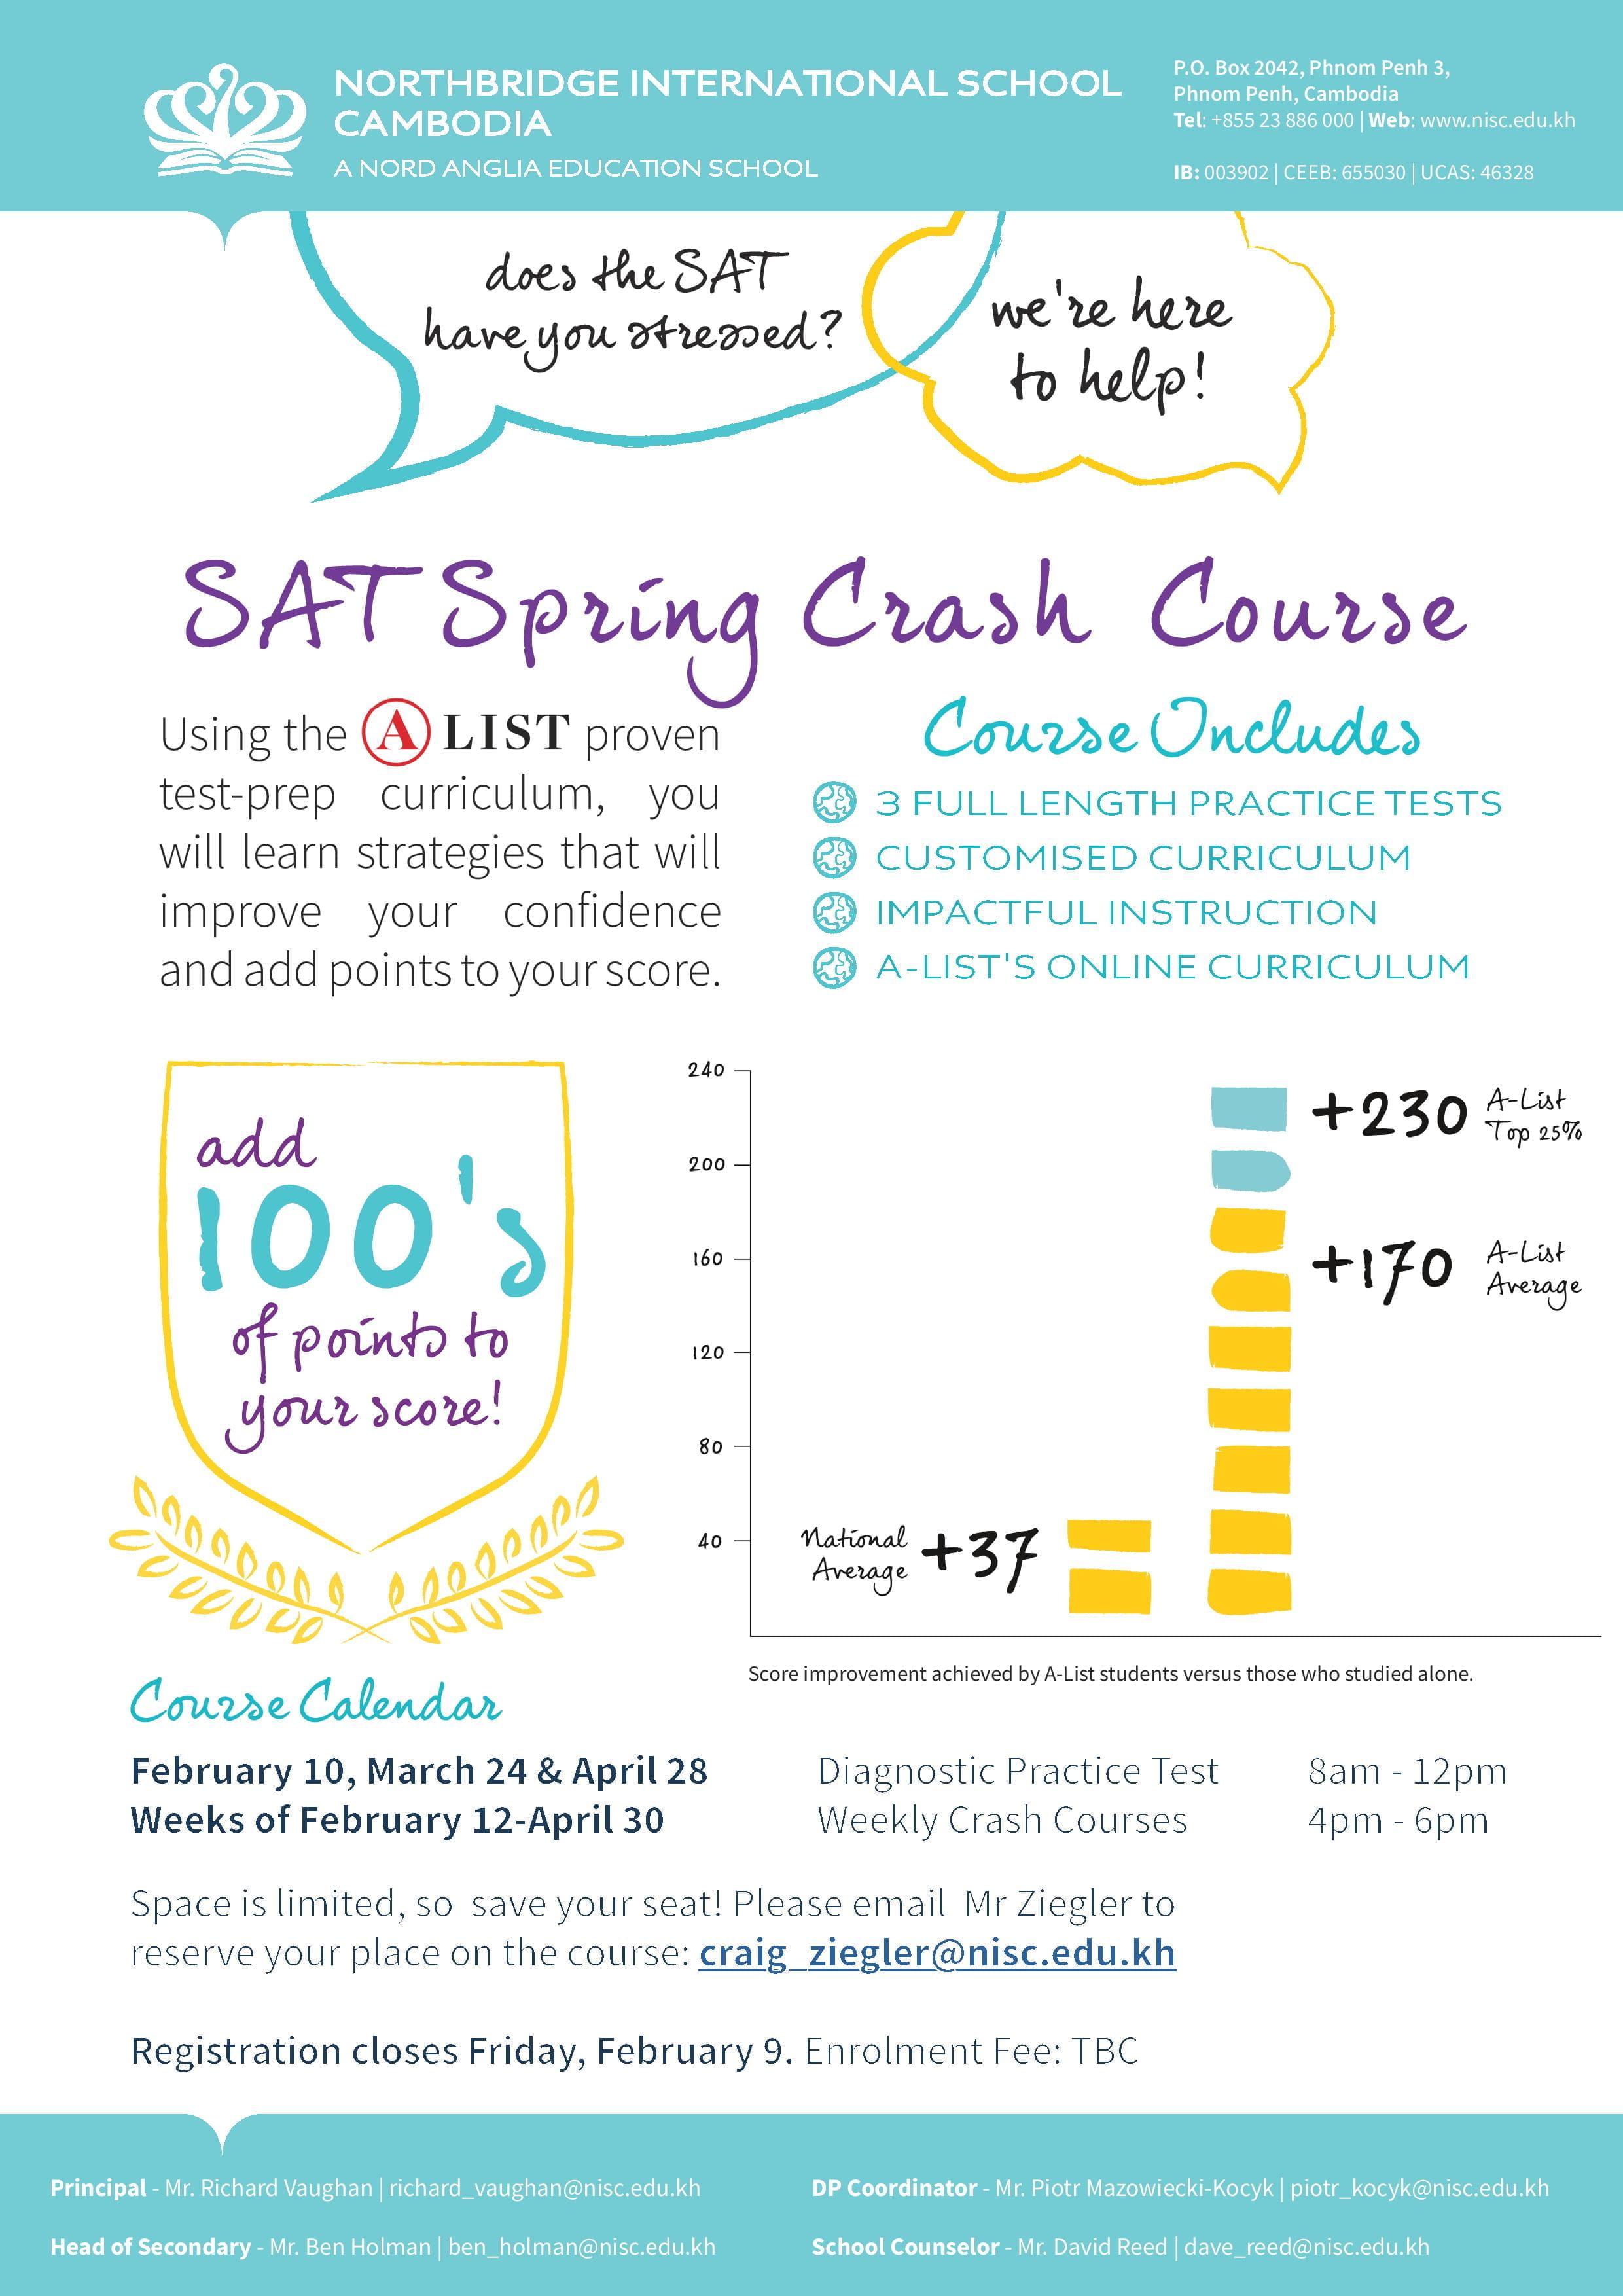 Sign up for the SAT Spring Crash Course - sign-up-for-the-sat-spring-crash-course